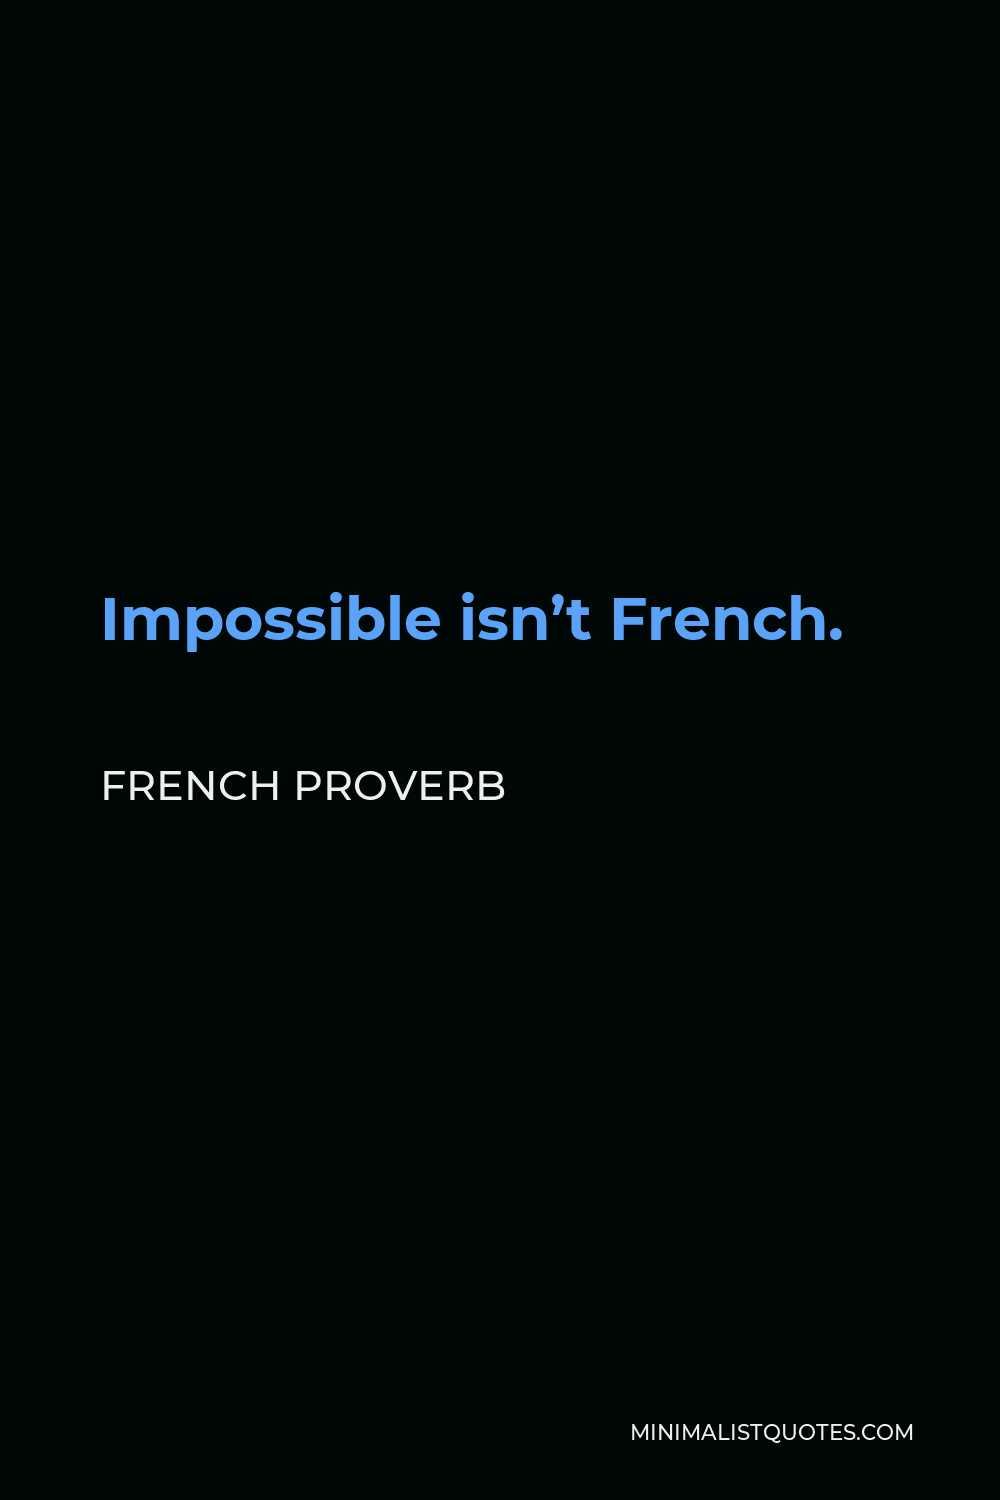 French Proverb Quote - Impossible isn’t French.